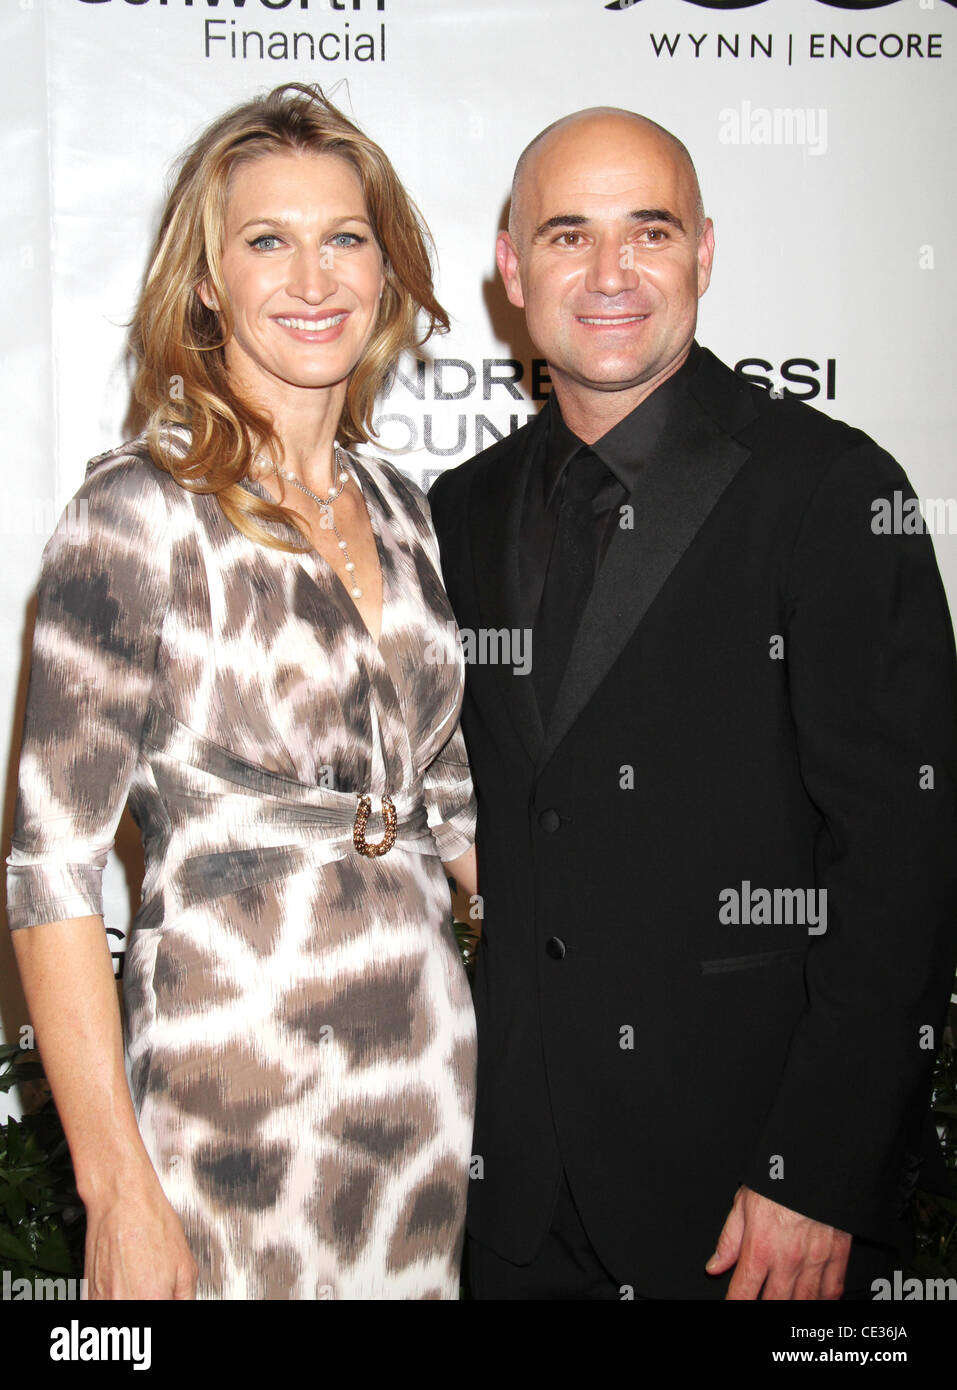 Steffi Graf, Andre Agassi 15th Annual GRAND SLAM FOR CHILDREN hosted by  Andre Agassi held at Wynn Hotel and Casino. Las Vegas, Nevada - 09.10.10  Stock Photo - Alamy